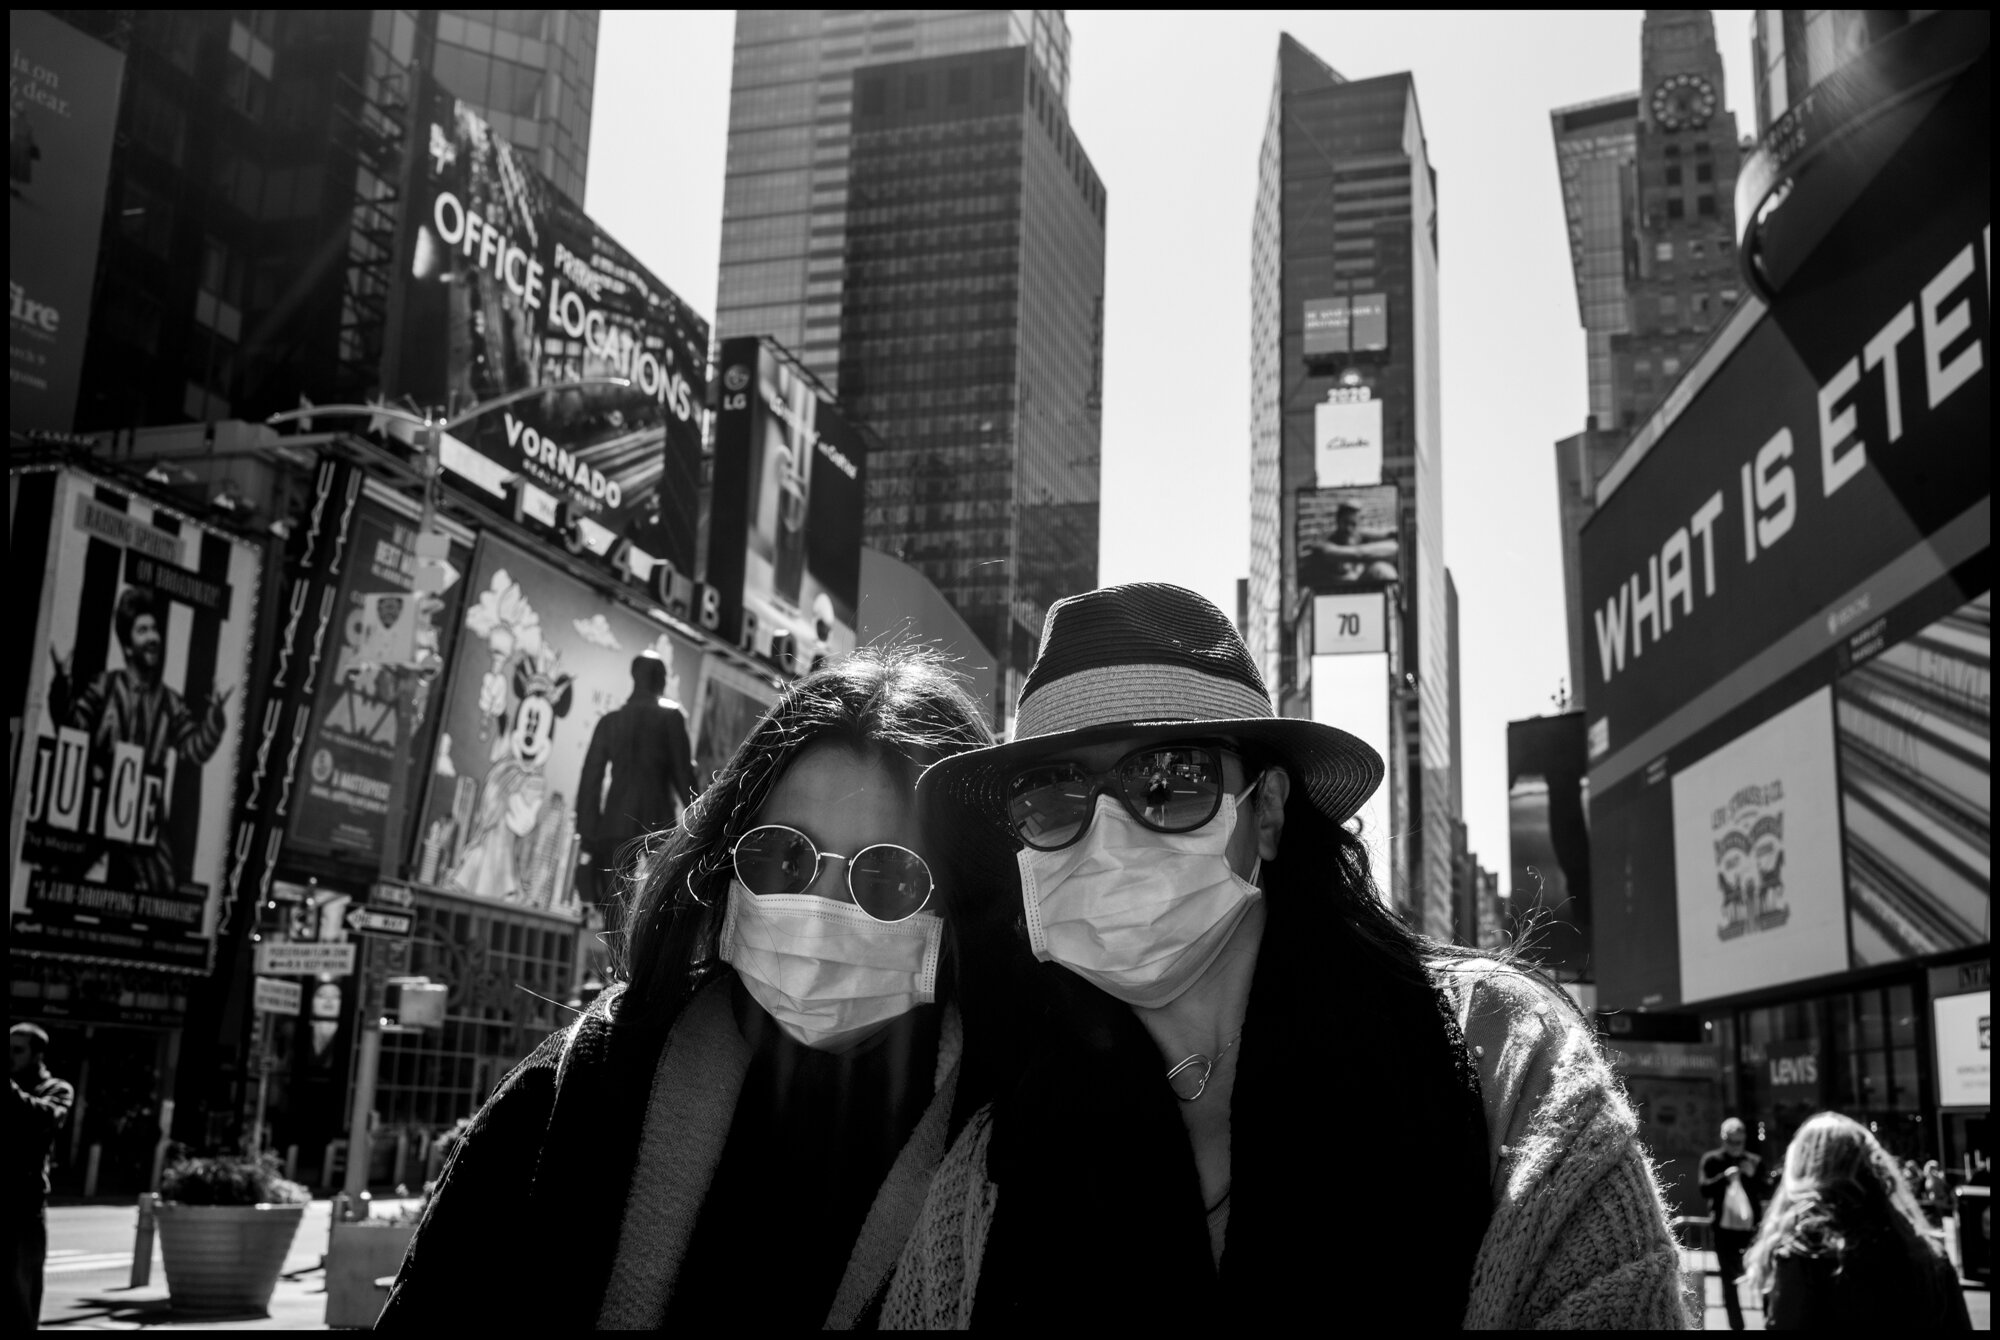  Two women, a mother and a daughter, from Toulouse, France, stood almost alone in Times Square. The mother explained that her daughter was working as a fille—au pair and she was working in Philadelphia, and they had decided to take the bus to NY to s